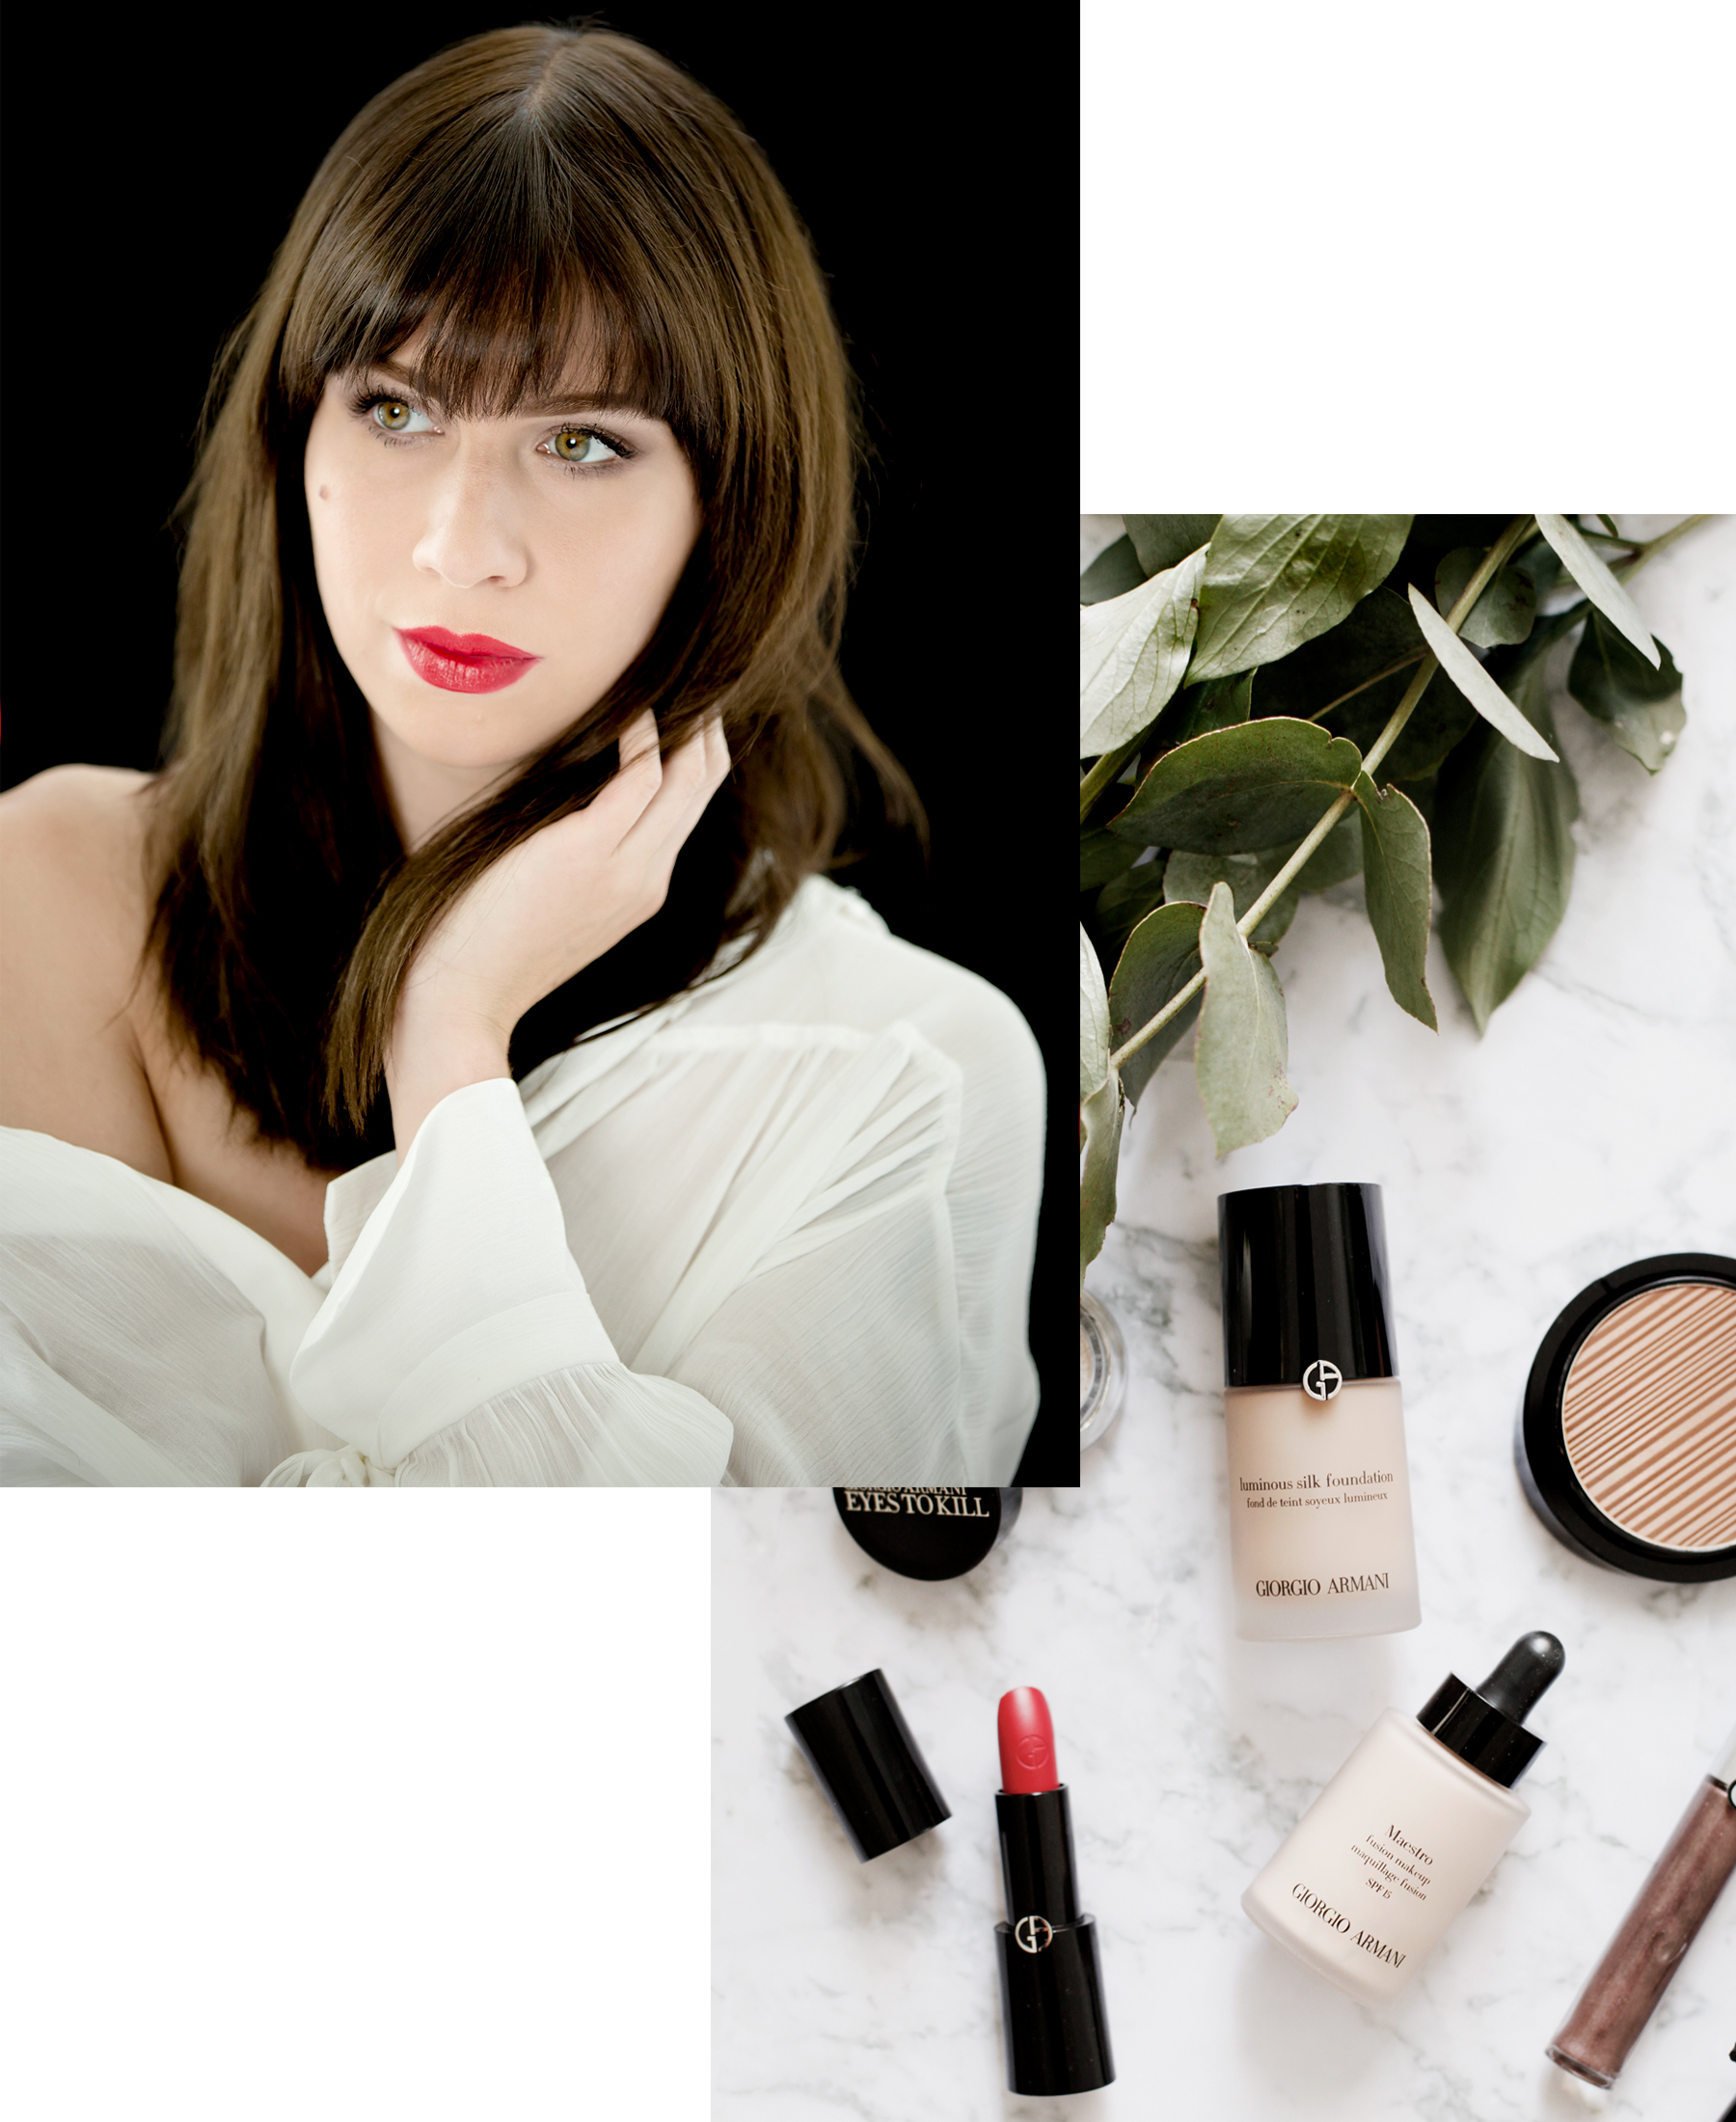 armani beauty make-up summer look red lips amu eyemakeup eyeshadow eyes to kill armani beauty francaise parisienne chic beautyblogger germany ricarda schernus blogger cats & dogs lifestyle blog 3